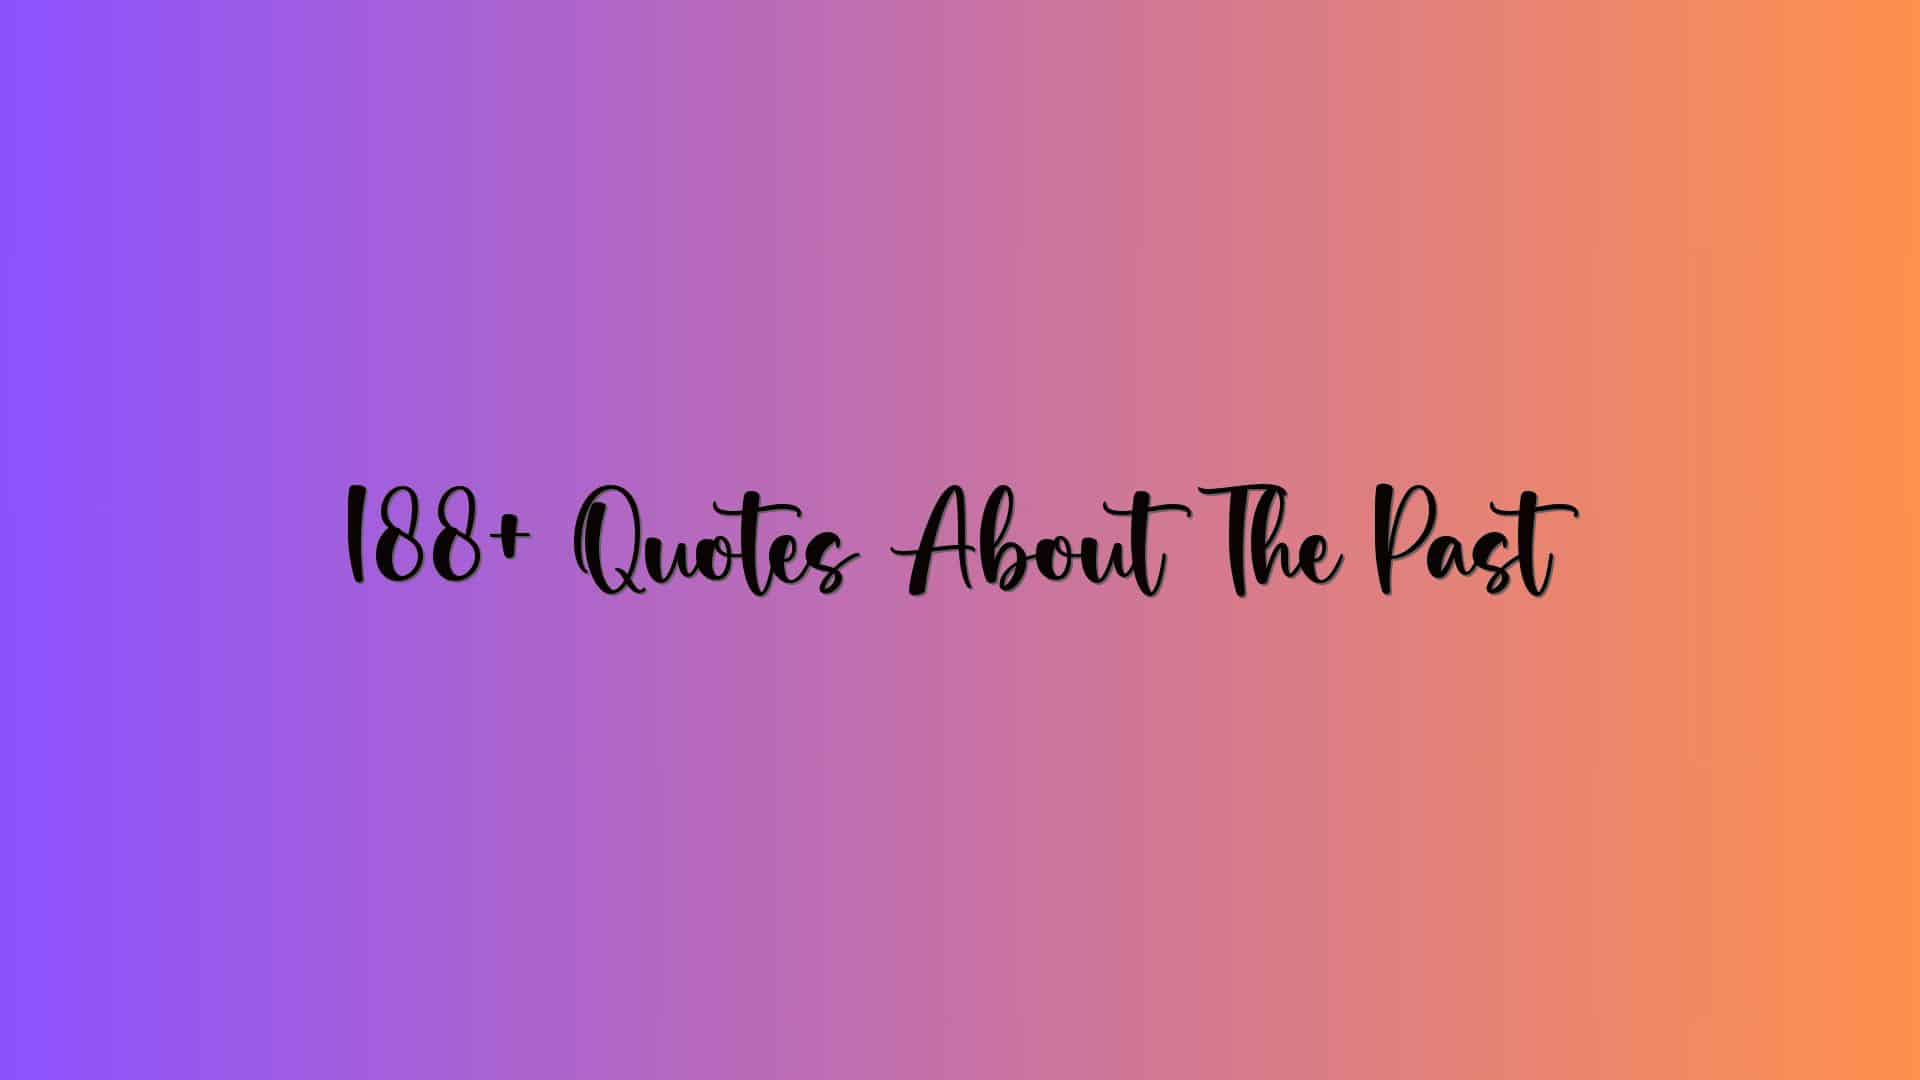 188+ Quotes About The Past